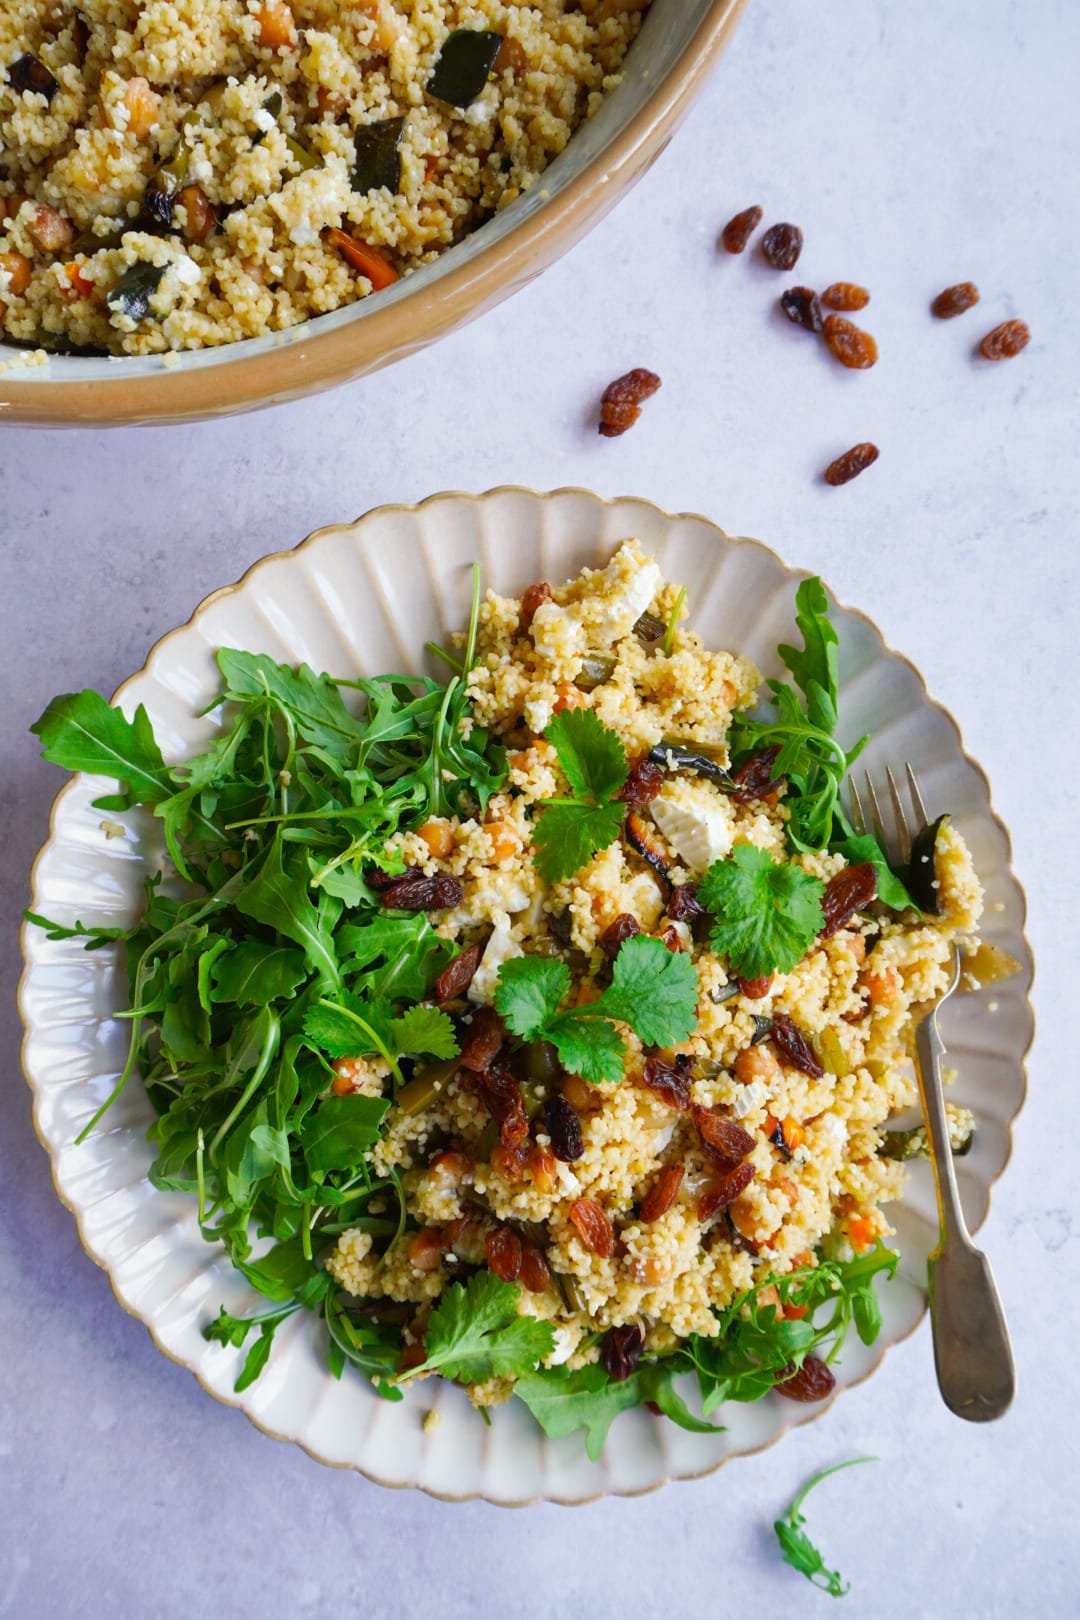 Quick and easy roasted vegetables couscous salad topped with arugula and sultanas